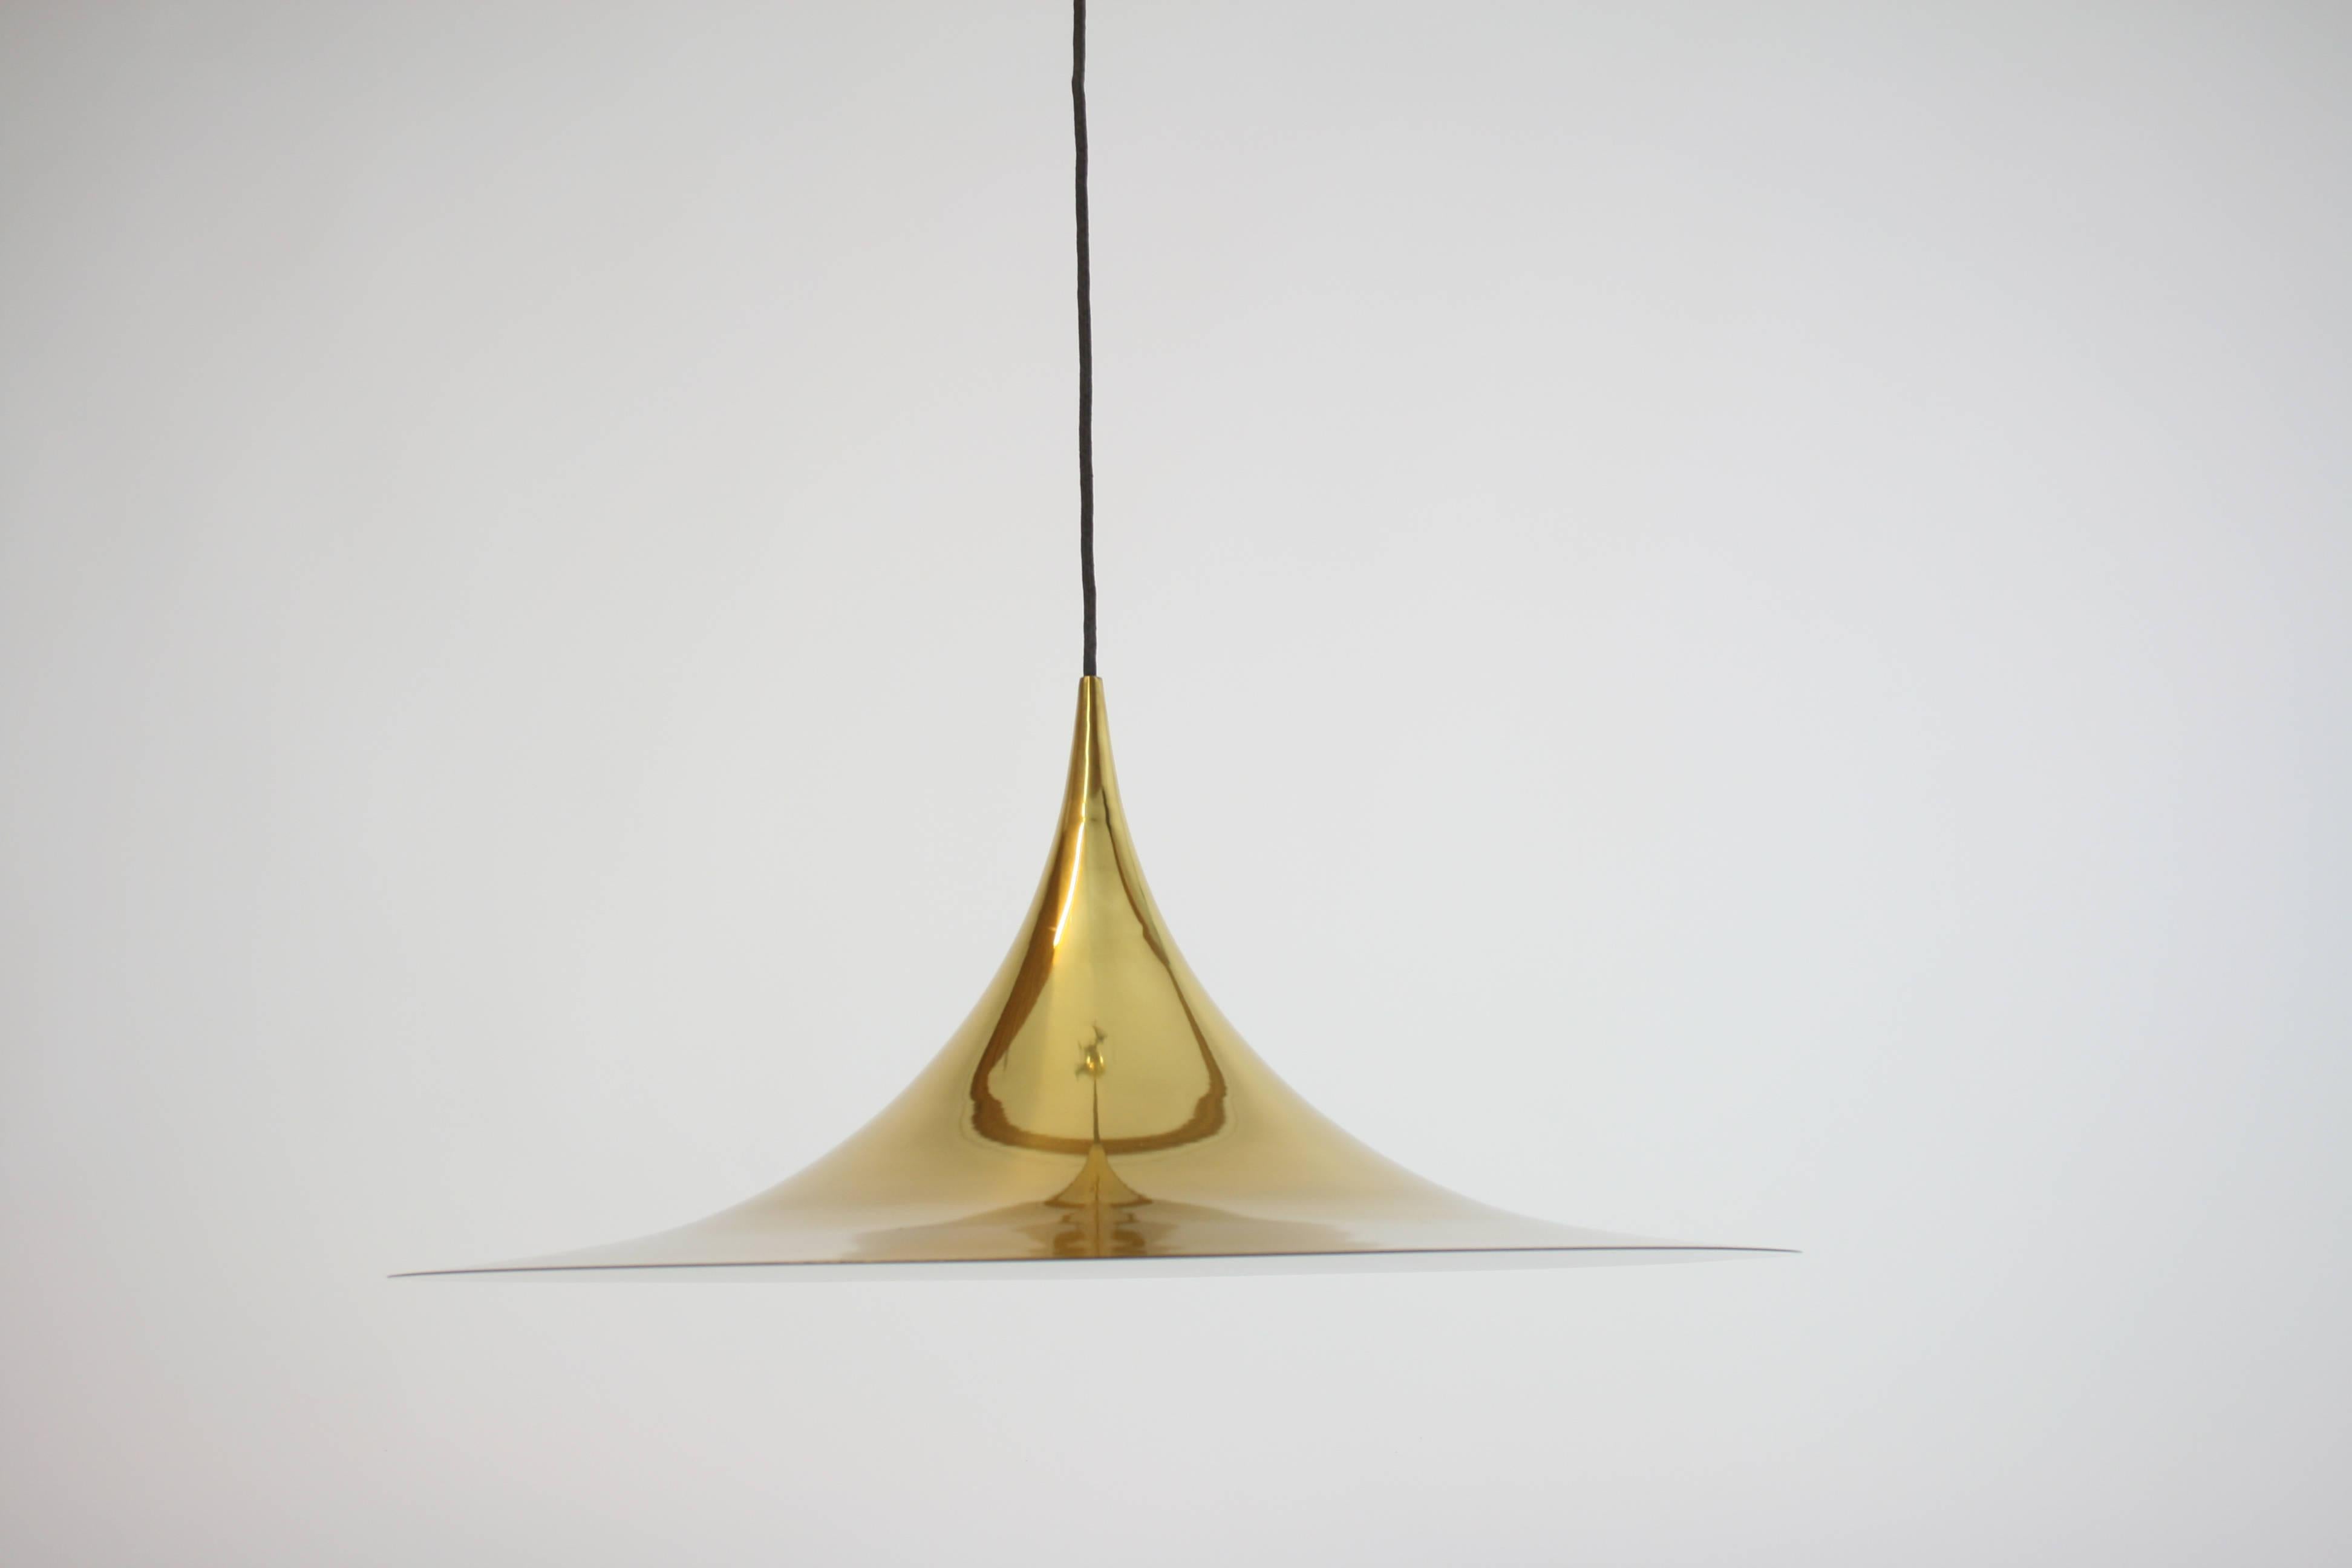 Large pendant designed by Claus Bonderup and Torsten Torup for Fog&Morup, Denmark, 1967. The quality and timeless extravagance of this iconic design remains valid up to our days. Its polished brass surface increases the degree of elegance many times